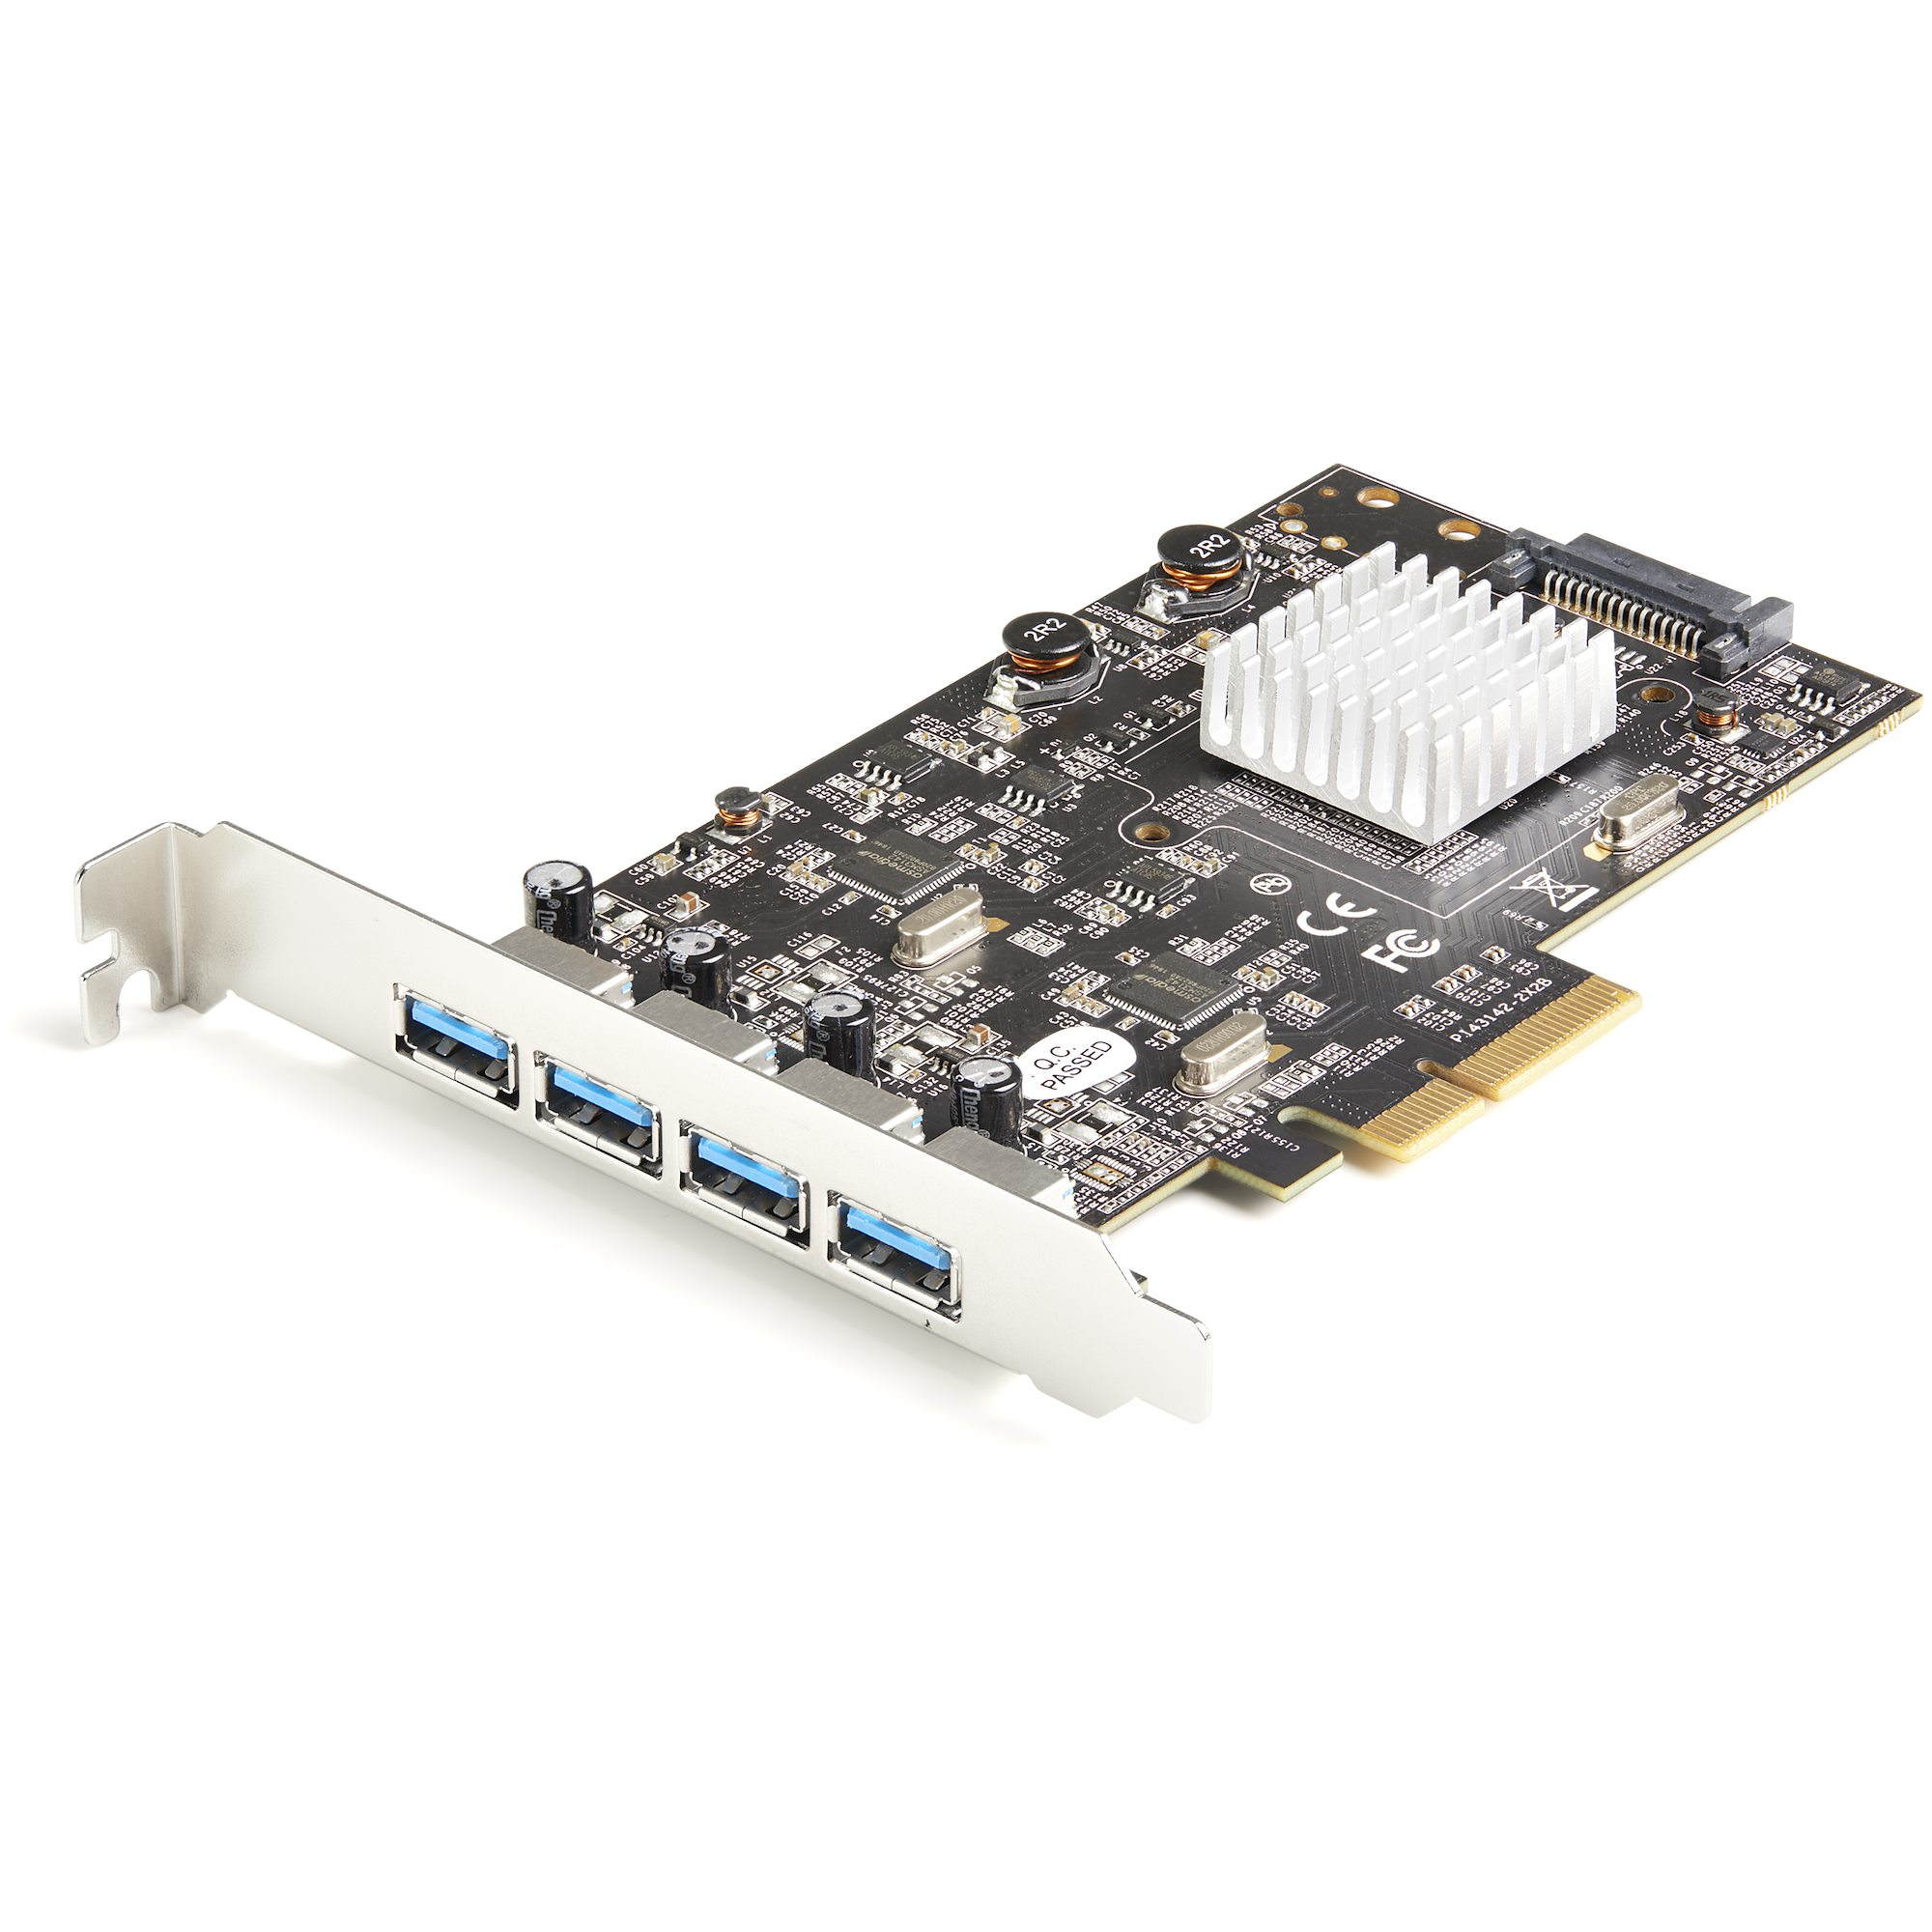 StarTech.com 4-Port USB PCIe Card - 10Gbps USB 3.1/3.2 Gen 2 Type-A PCI Express Expansion Card with 2 Controllers - 4x USB-A - USB PCIe Add-On Adapter Card - Windows/Mac/Linux